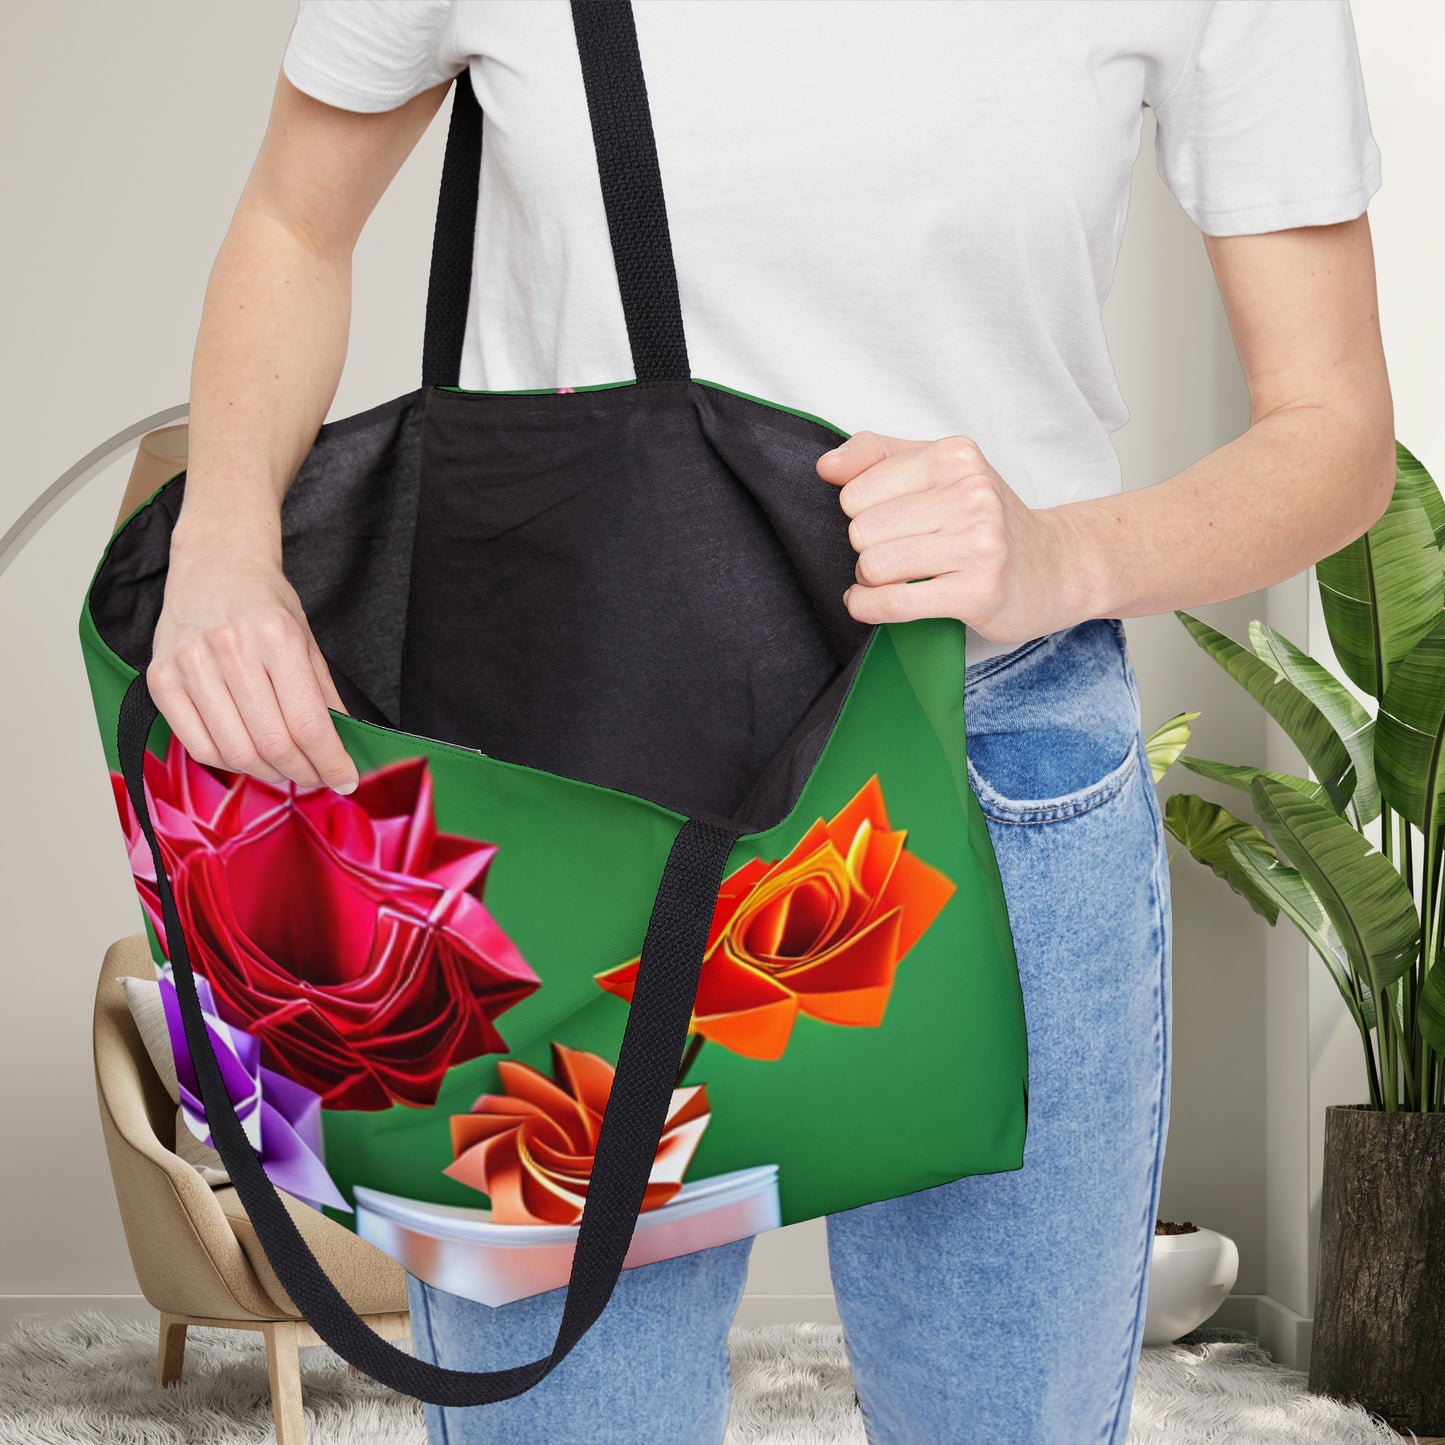 Colorful  and beautiful roses in Origami inspired style design on this pretty Weekender Tote Bag.